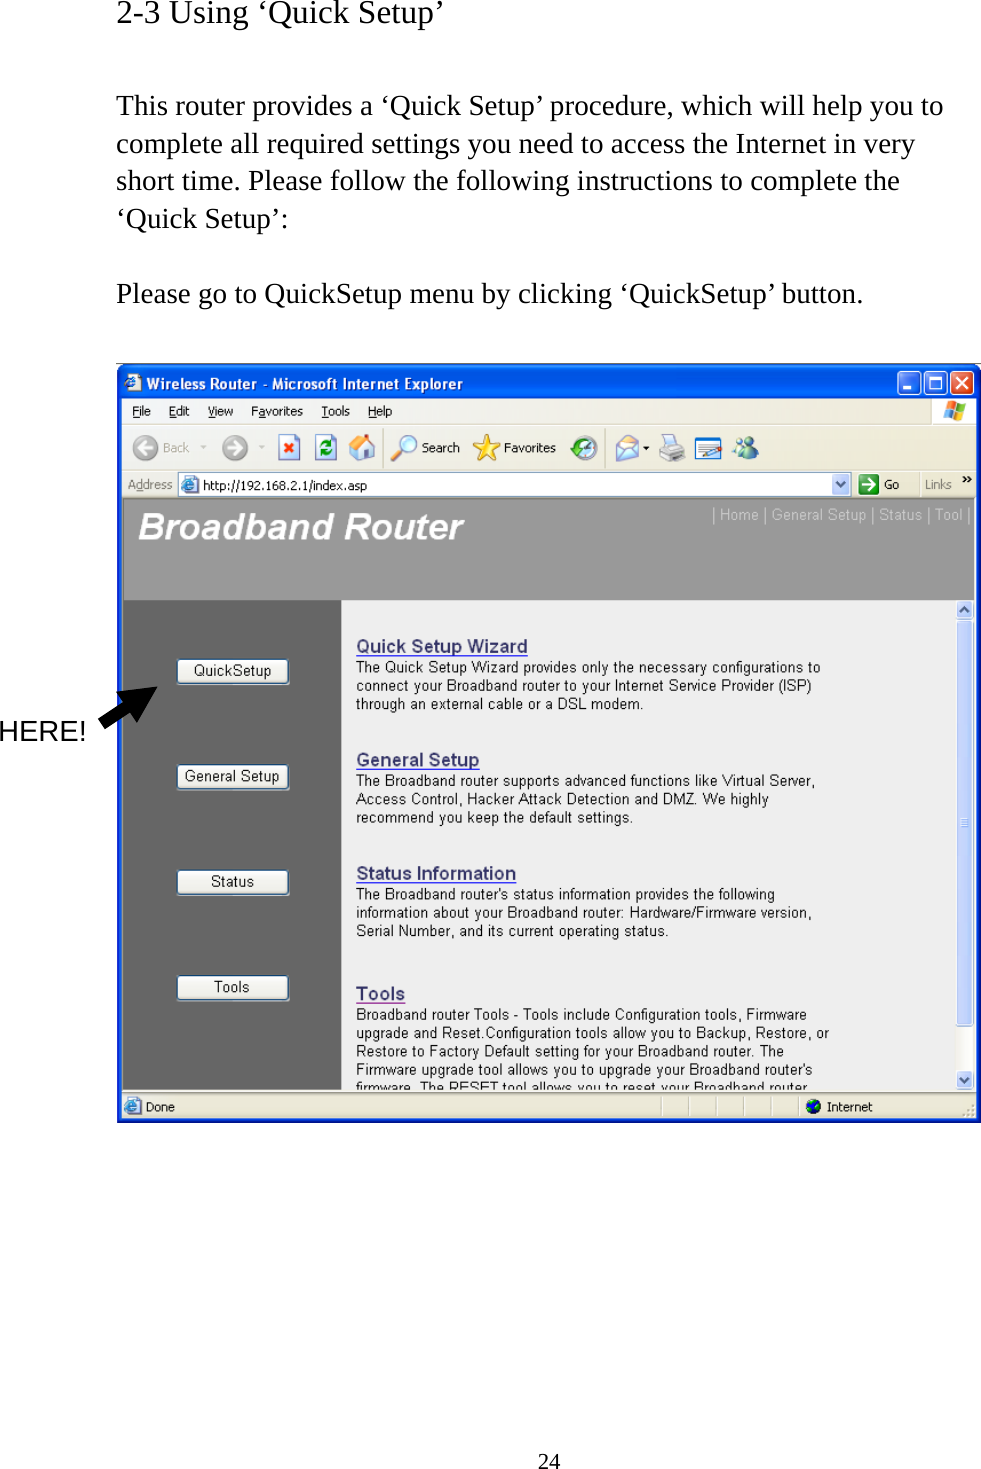 24 2-3 Using ‘Quick Setup’  This router provides a ‘Quick Setup’ procedure, which will help you to complete all required settings you need to access the Internet in very short time. Please follow the following instructions to complete the ‘Quick Setup’:  Please go to QuickSetup menu by clicking ‘QuickSetup’ button.         HERE! 